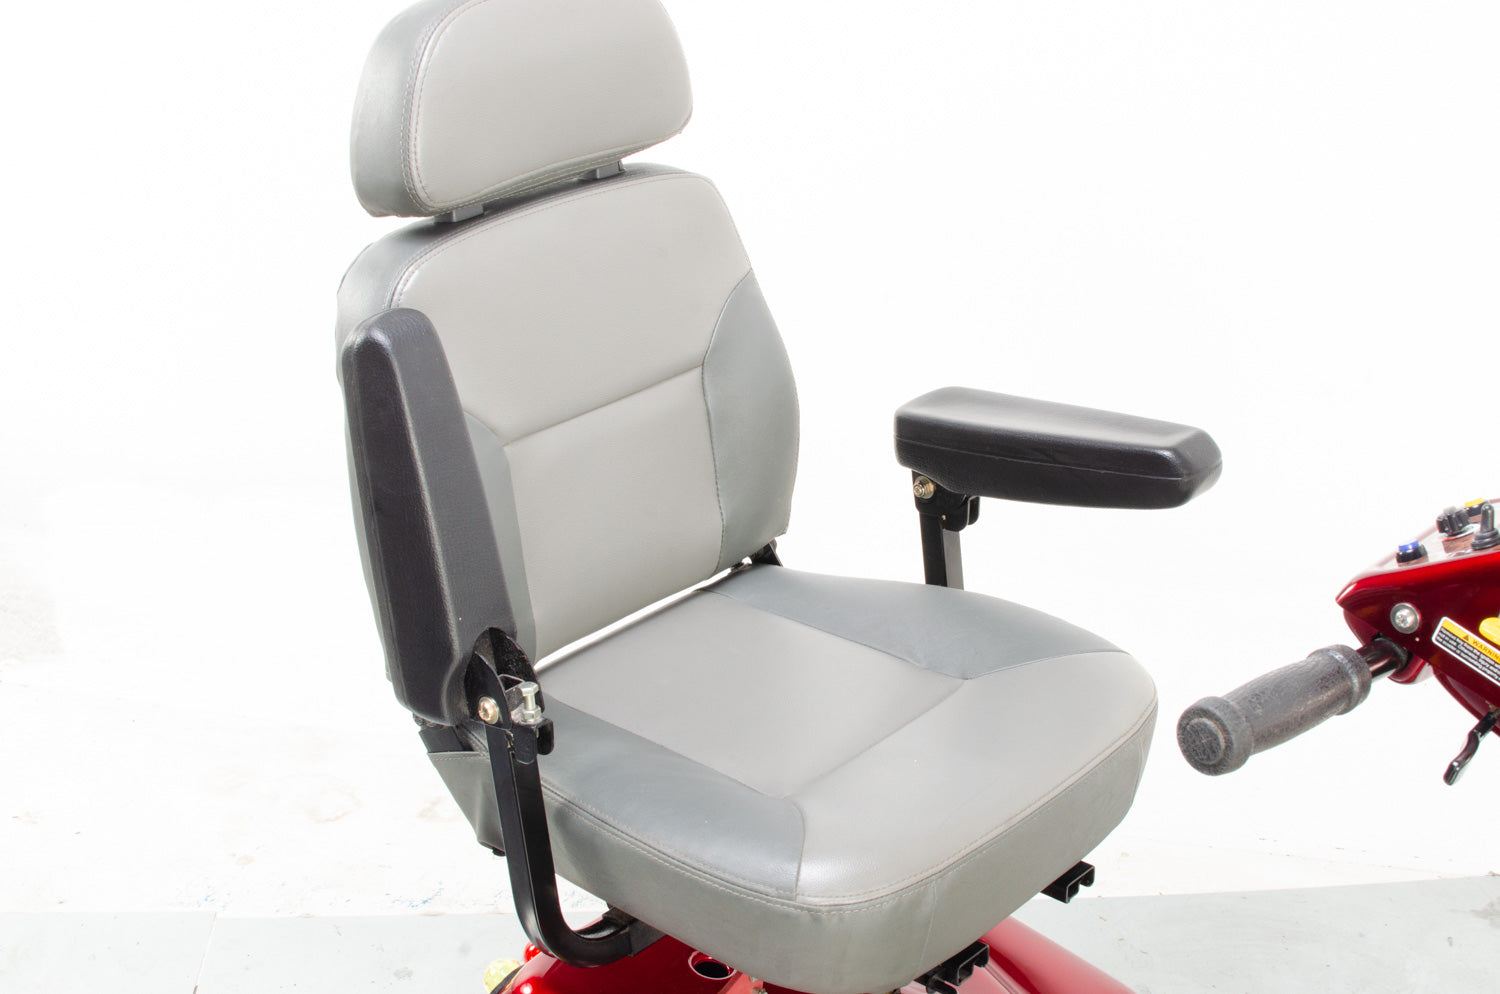 2014 Rascal 388XL 6mph Mid Size Comfort Electric Mobility Scooter in Red